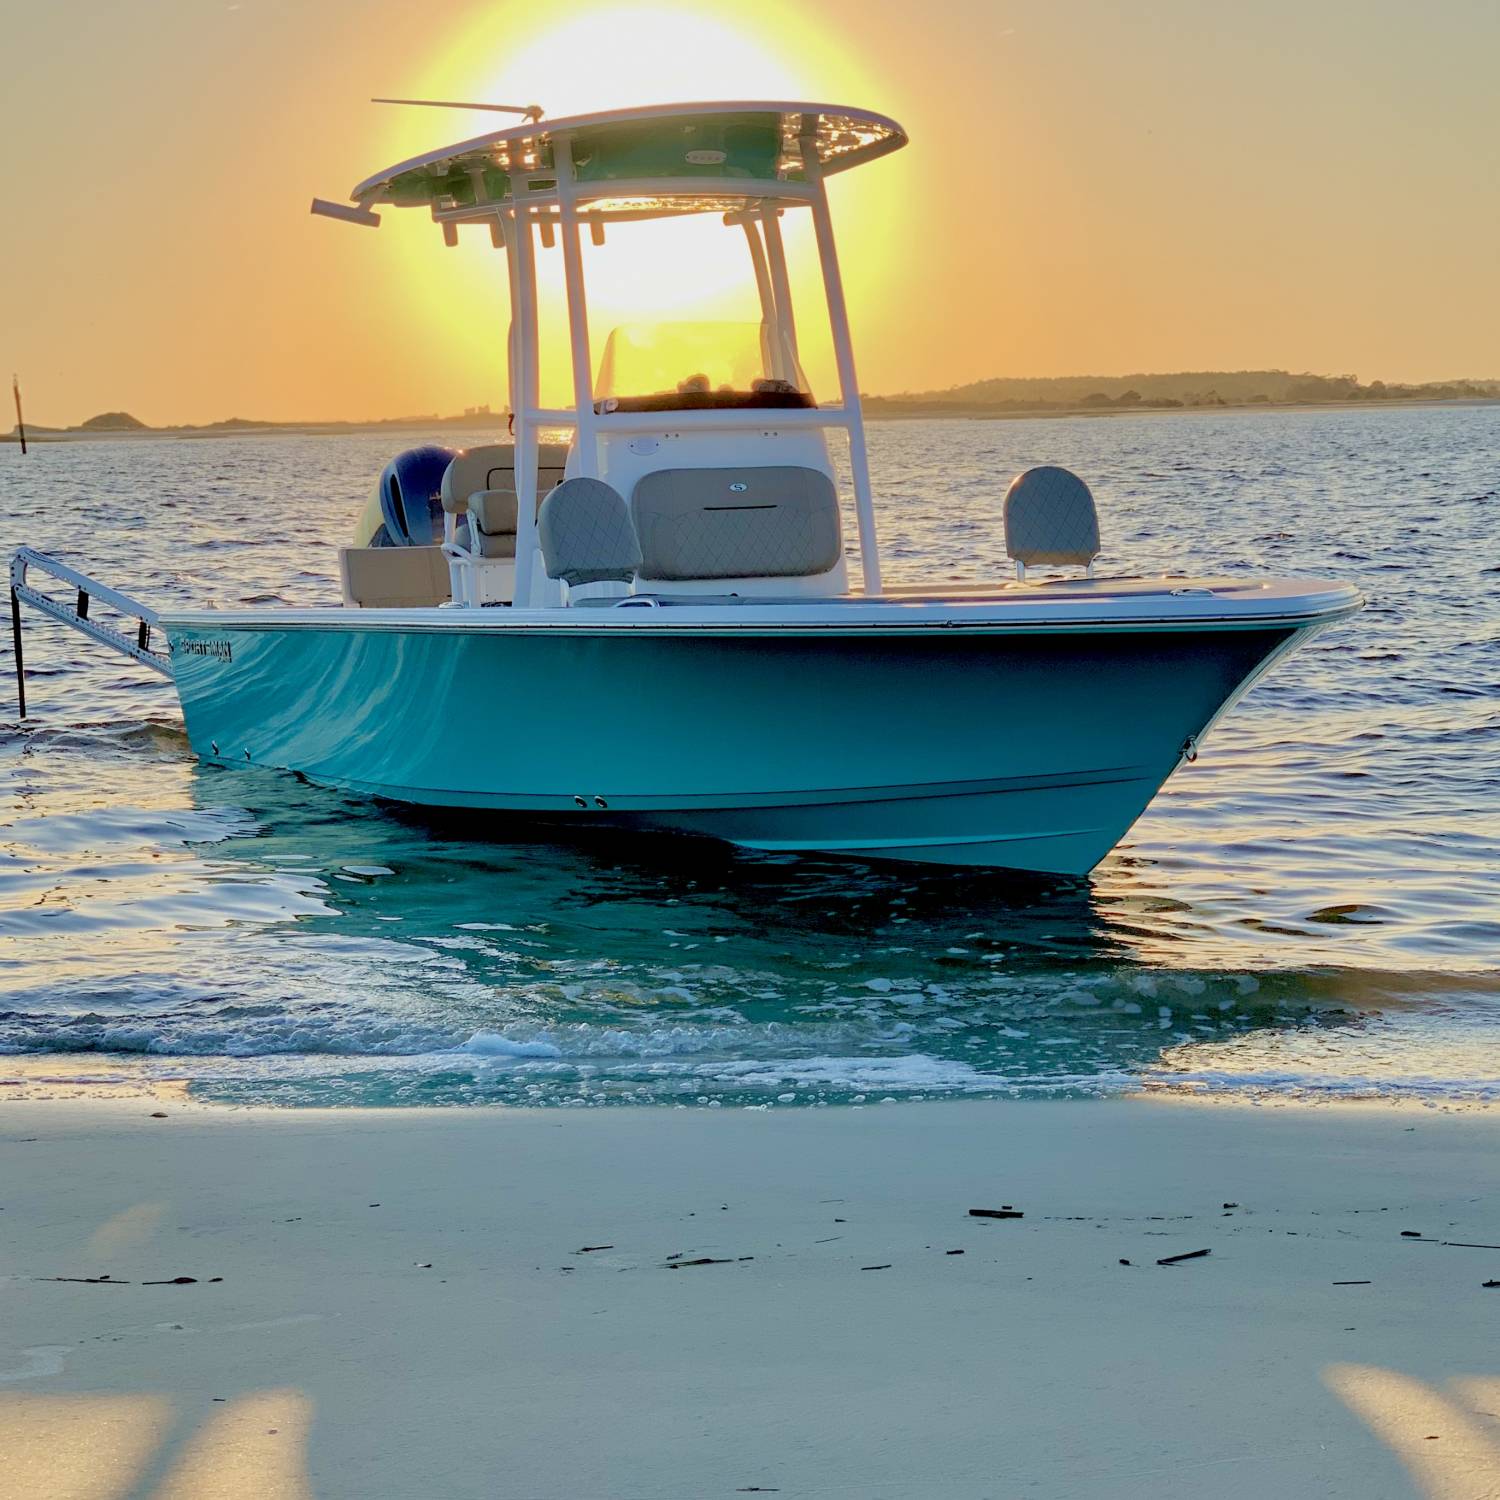 Title: Island Time - On board their Sportsman Masters 227 Bay Boat - Location: Bird Island. Participating in the Photo Contest #SportsmanJanuary2023